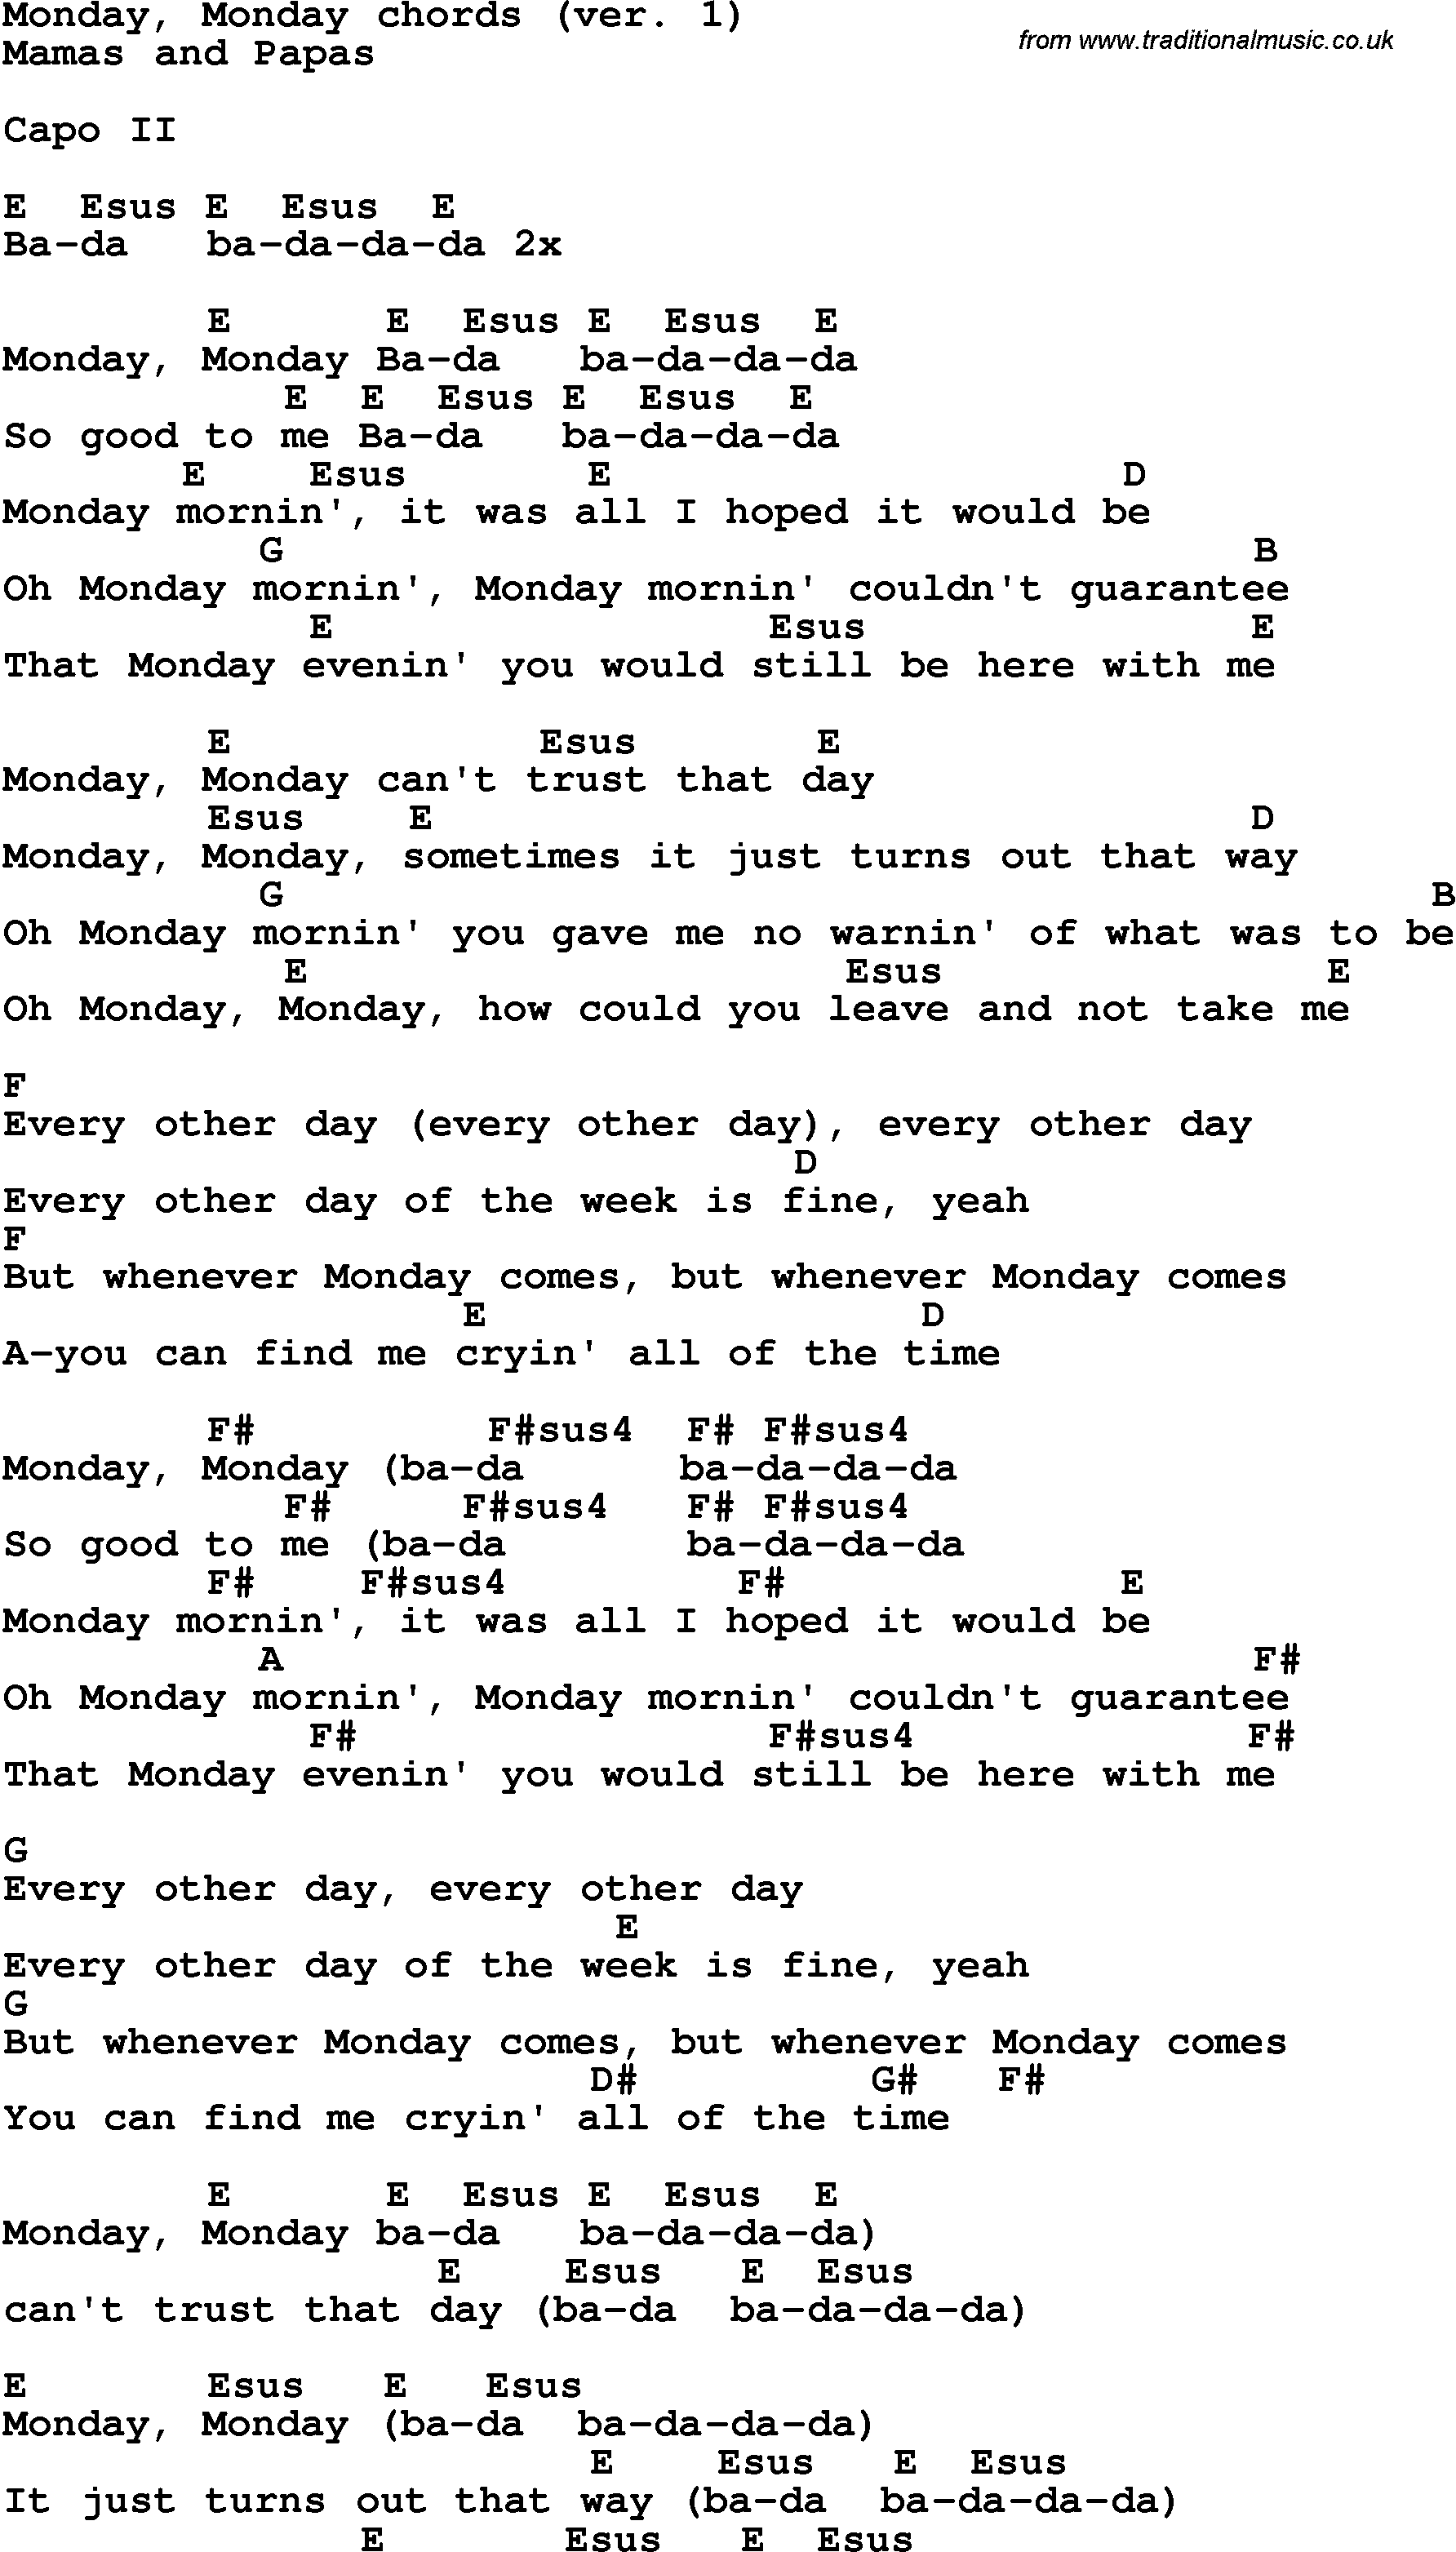 Song Lyrics with guitar chords for Monday, Monday